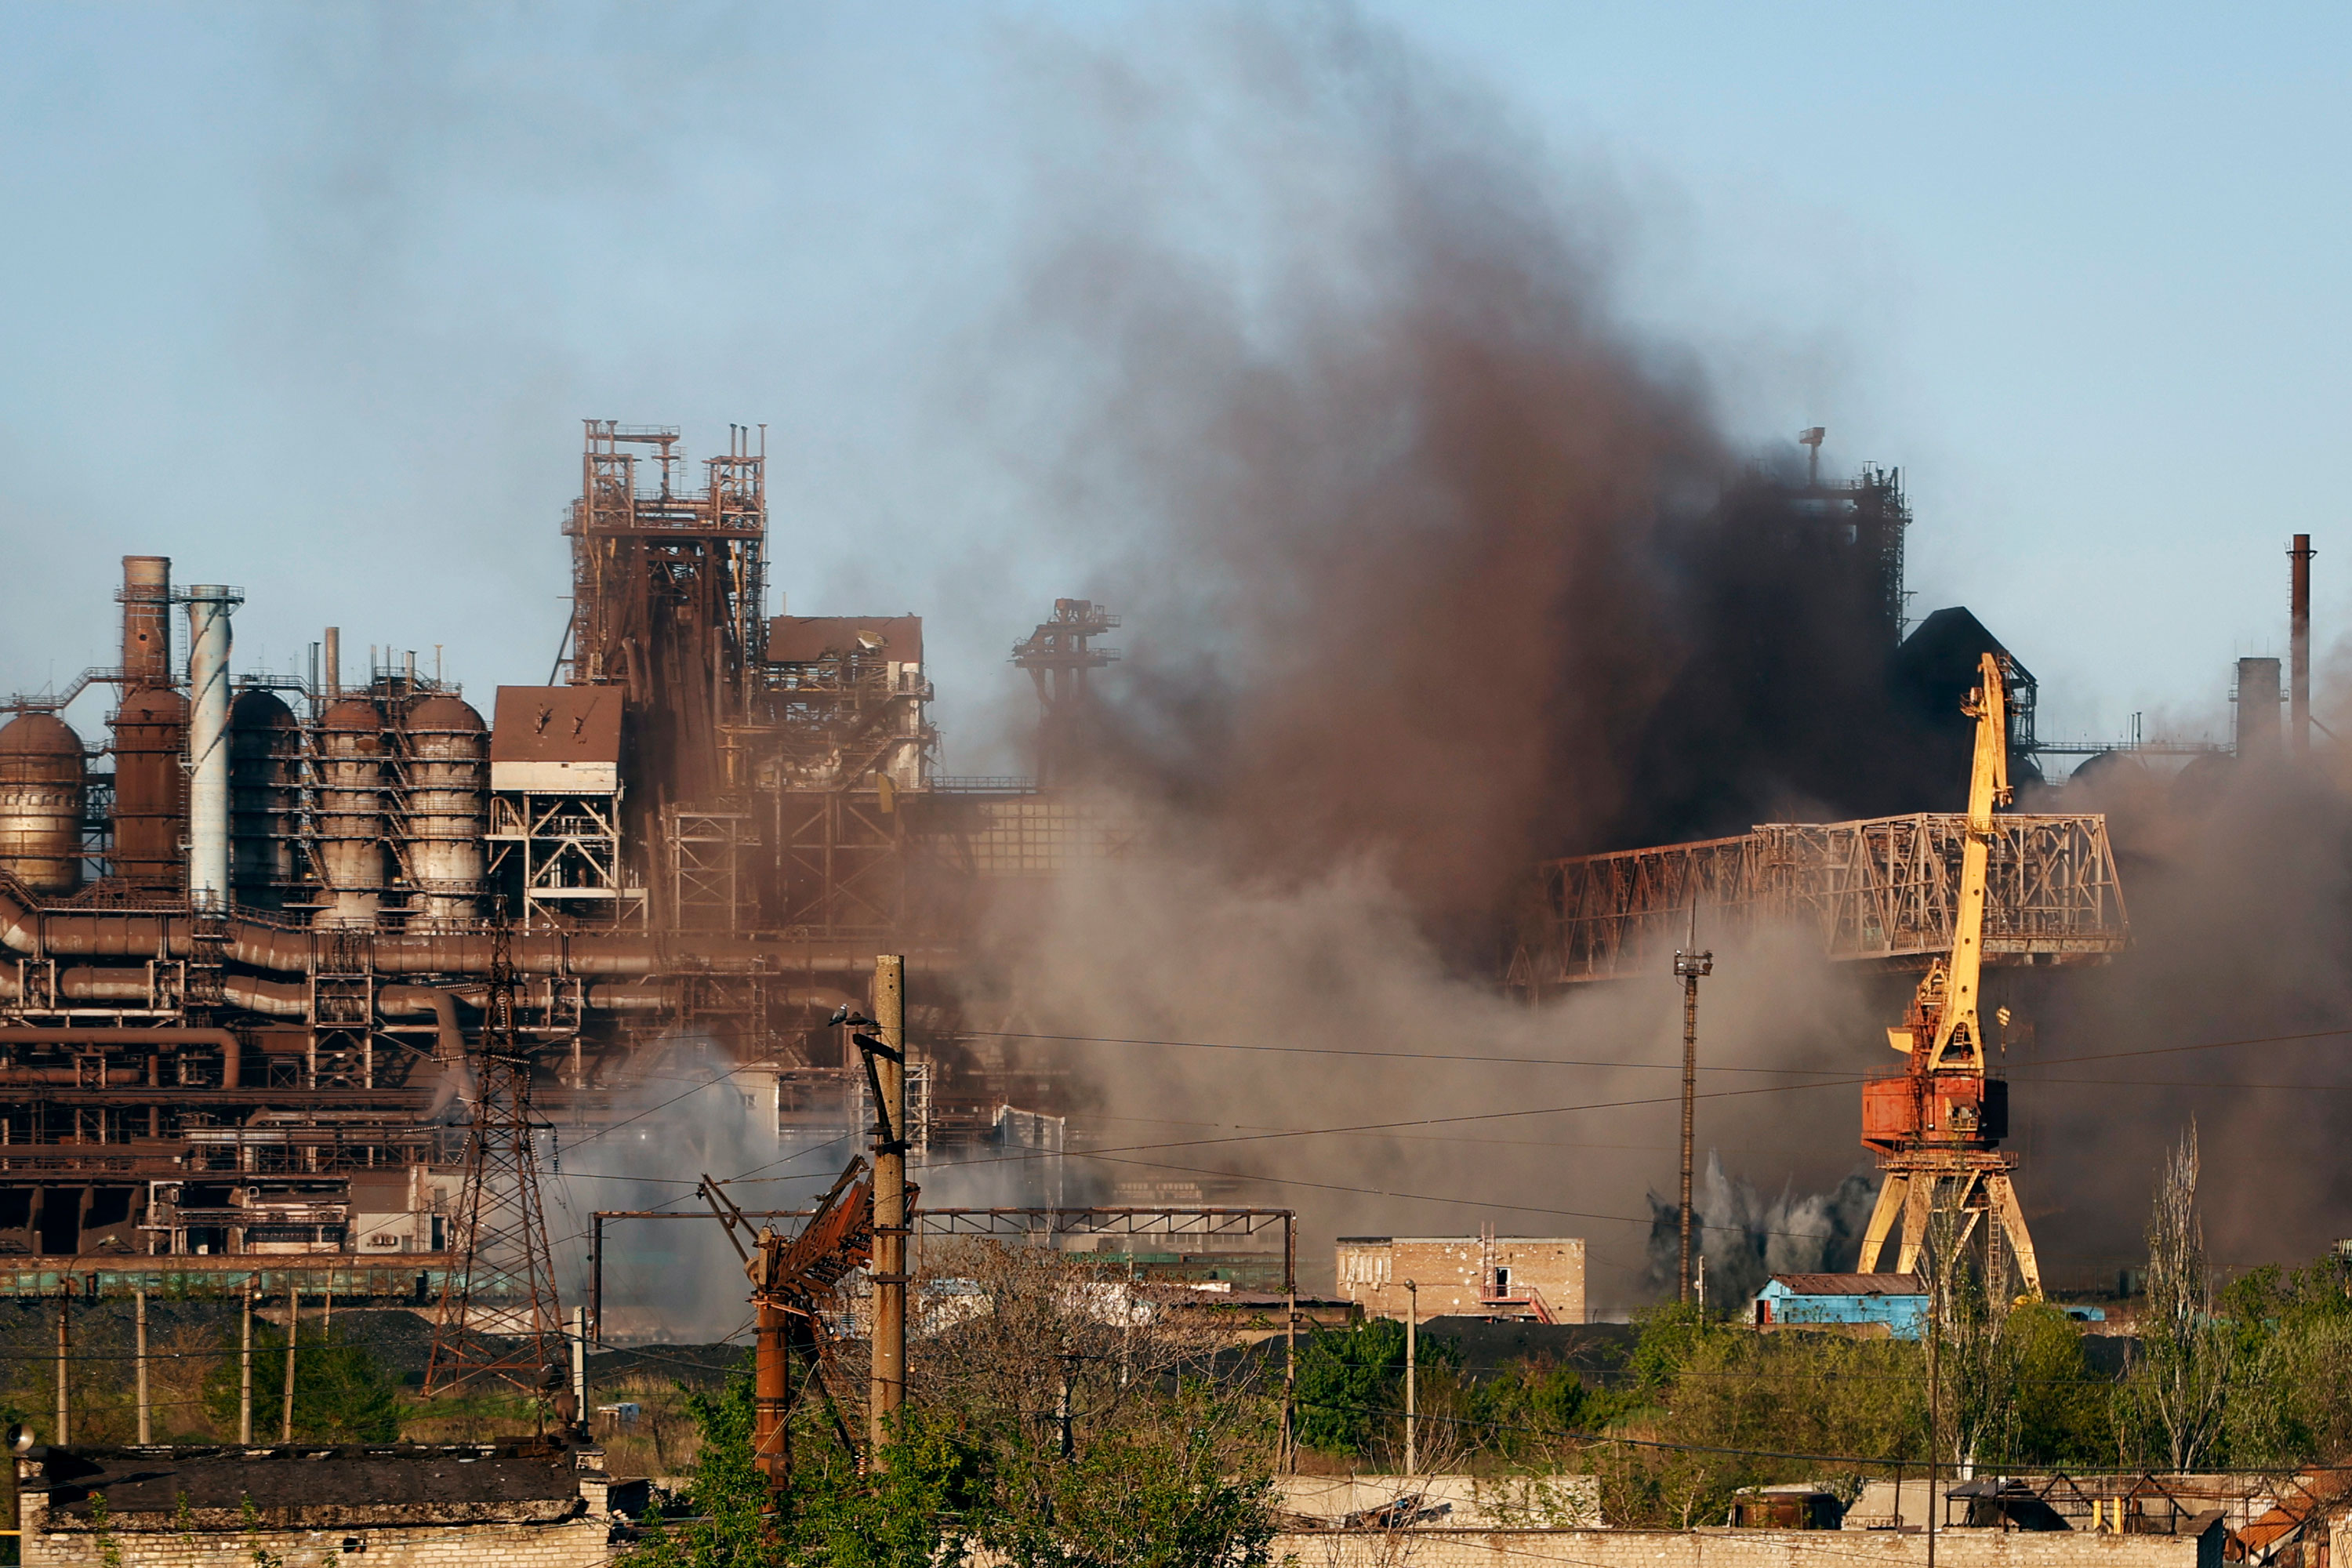 Smoke rises from the Azovstal steel plant in Mariupol, Ukraine, on May 7.